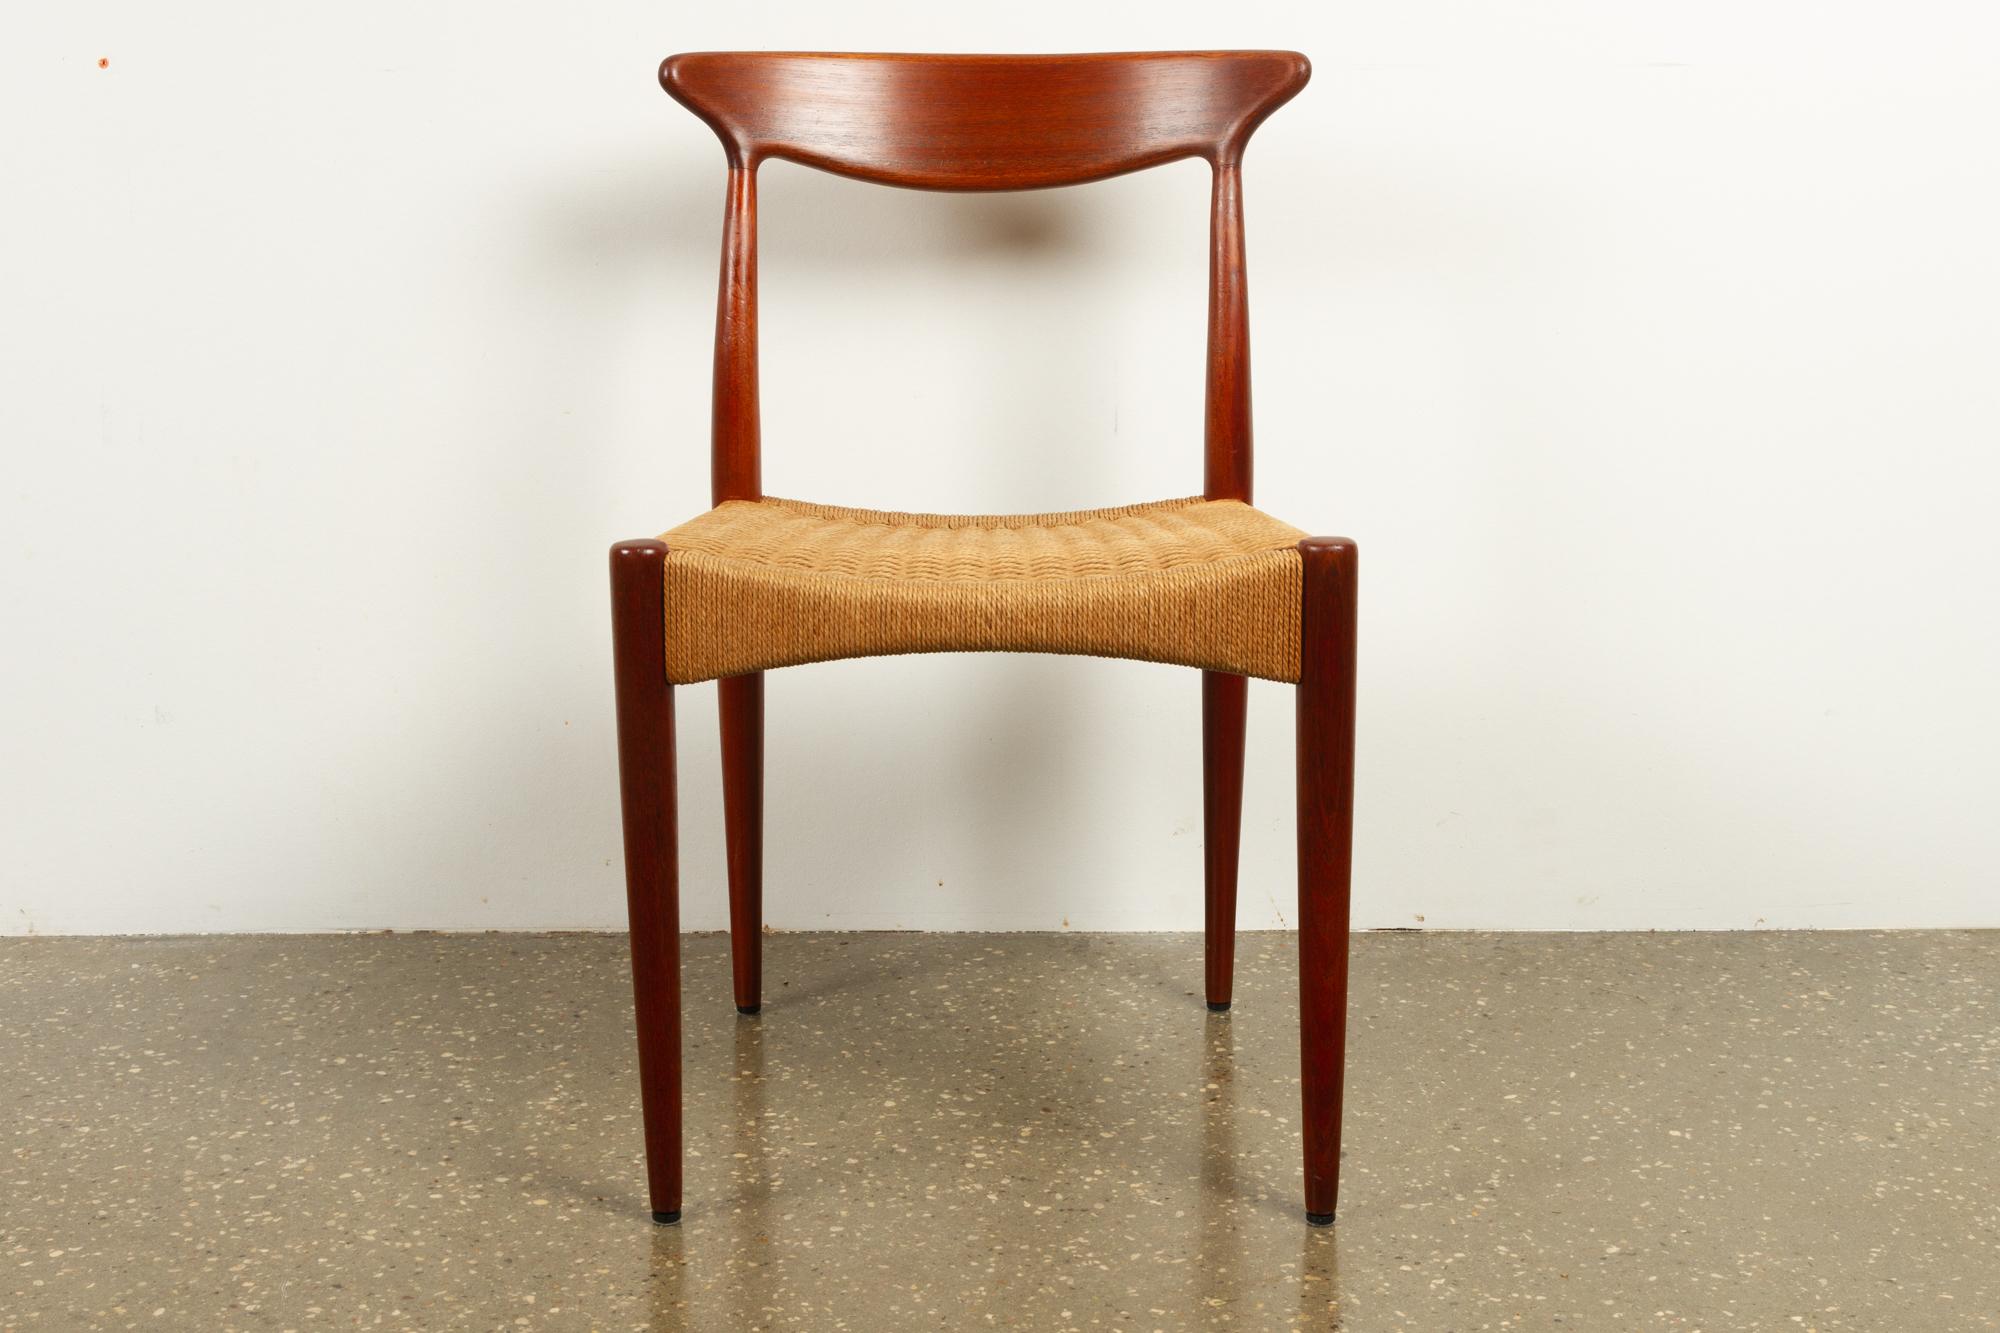 Vintage Danish teak chair by Arne Hovmand-Olsen for Mogens Kold, 1950s.
Elegant and sculptural chair in solid teak with original paper cord seat. Designed in 1951 as model MK310 by renowned Danish architect A. Hovmand Olsen. A very beautiful